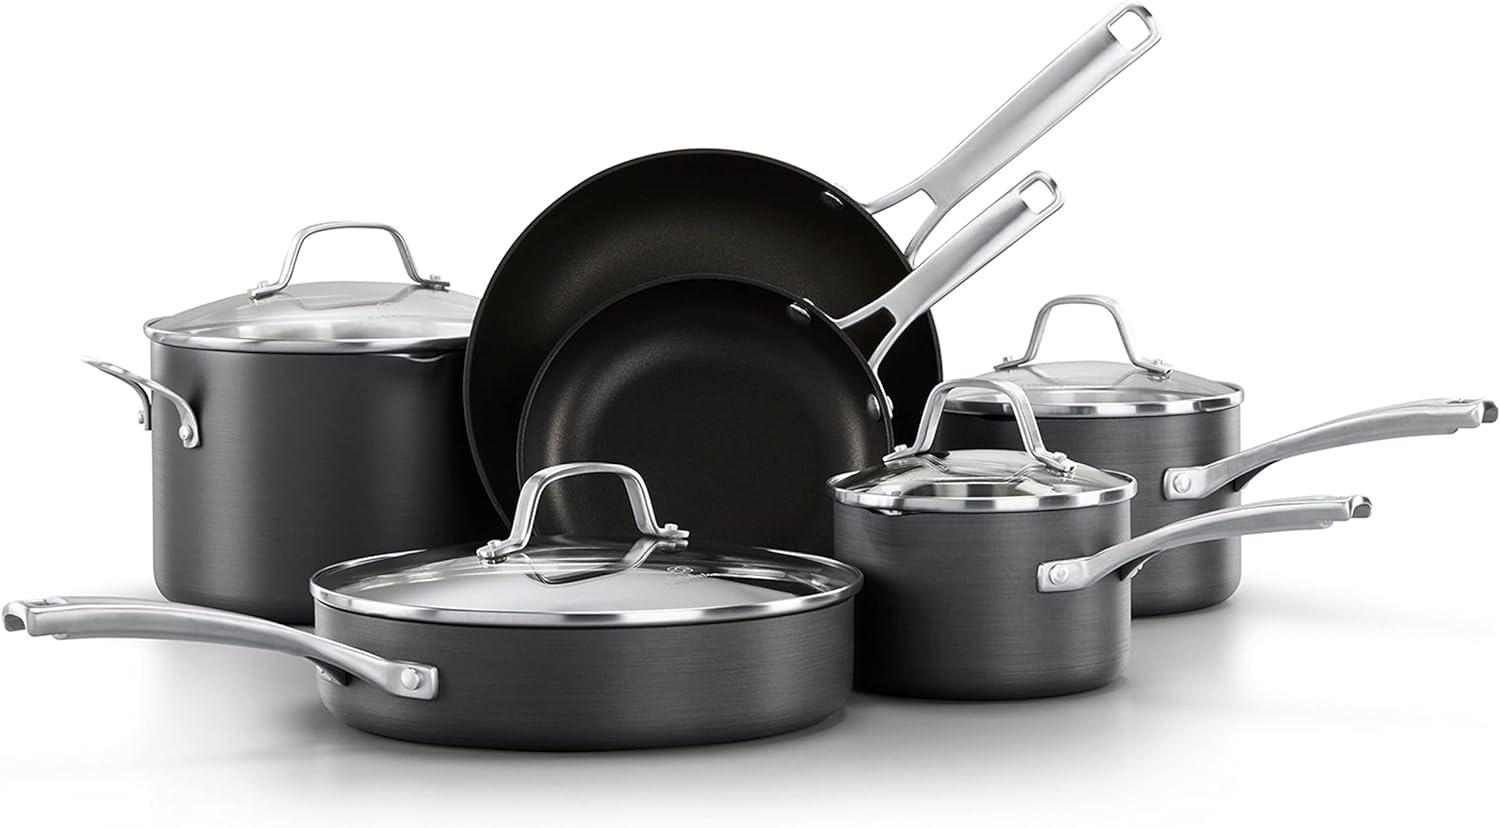 Calphalon Classic Hard-Anodized Nonstick Cookware for $127.49 Shipped